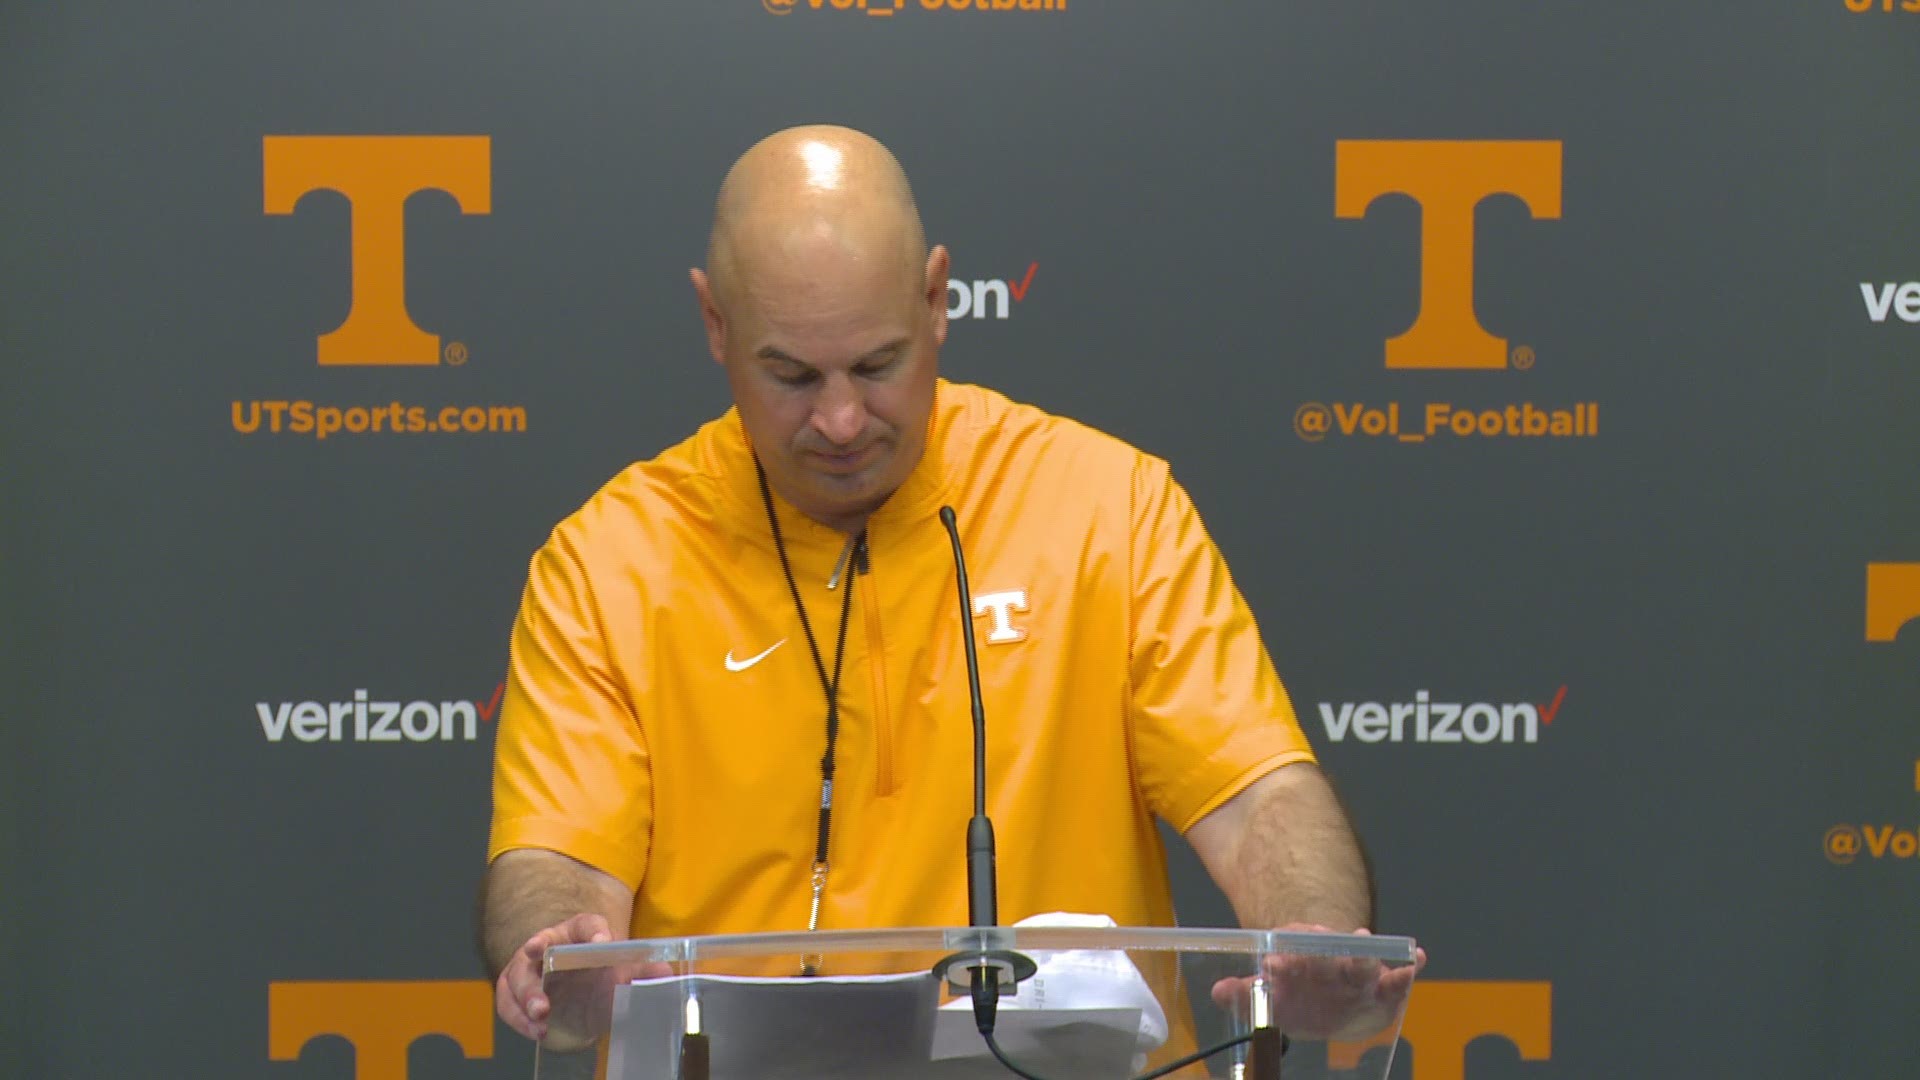 Jeremy Pruitt, Jarrett Guarantano and Ty Chandler speak on Saturday's Orange & White game. The white team defeated team orange, 28-10. Guarantano passed for 198 yards and four touchdowns.